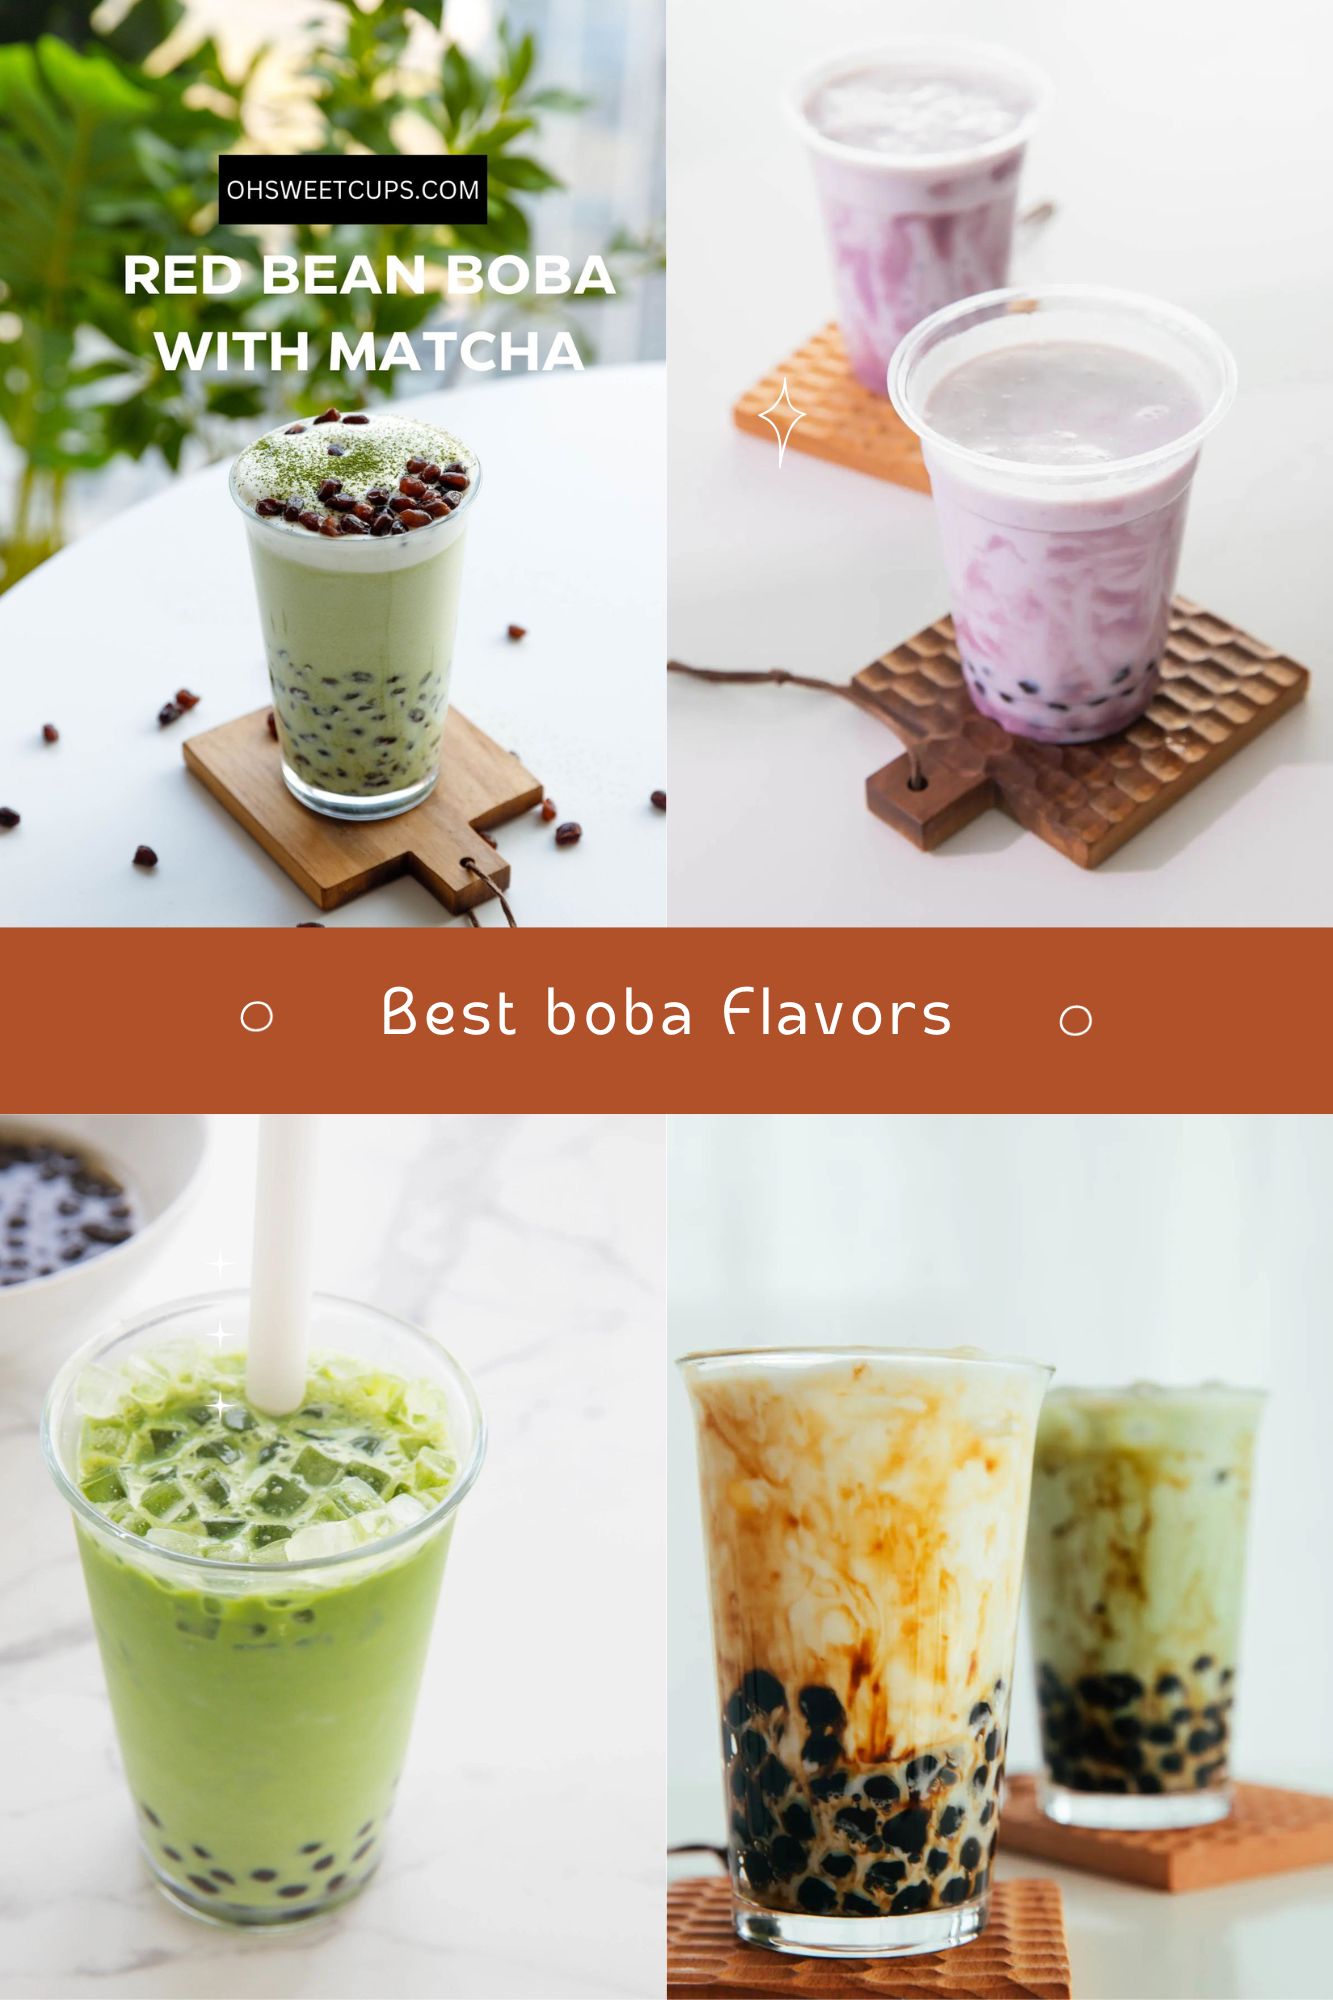 Best boba flavors|ohsweetcups.com